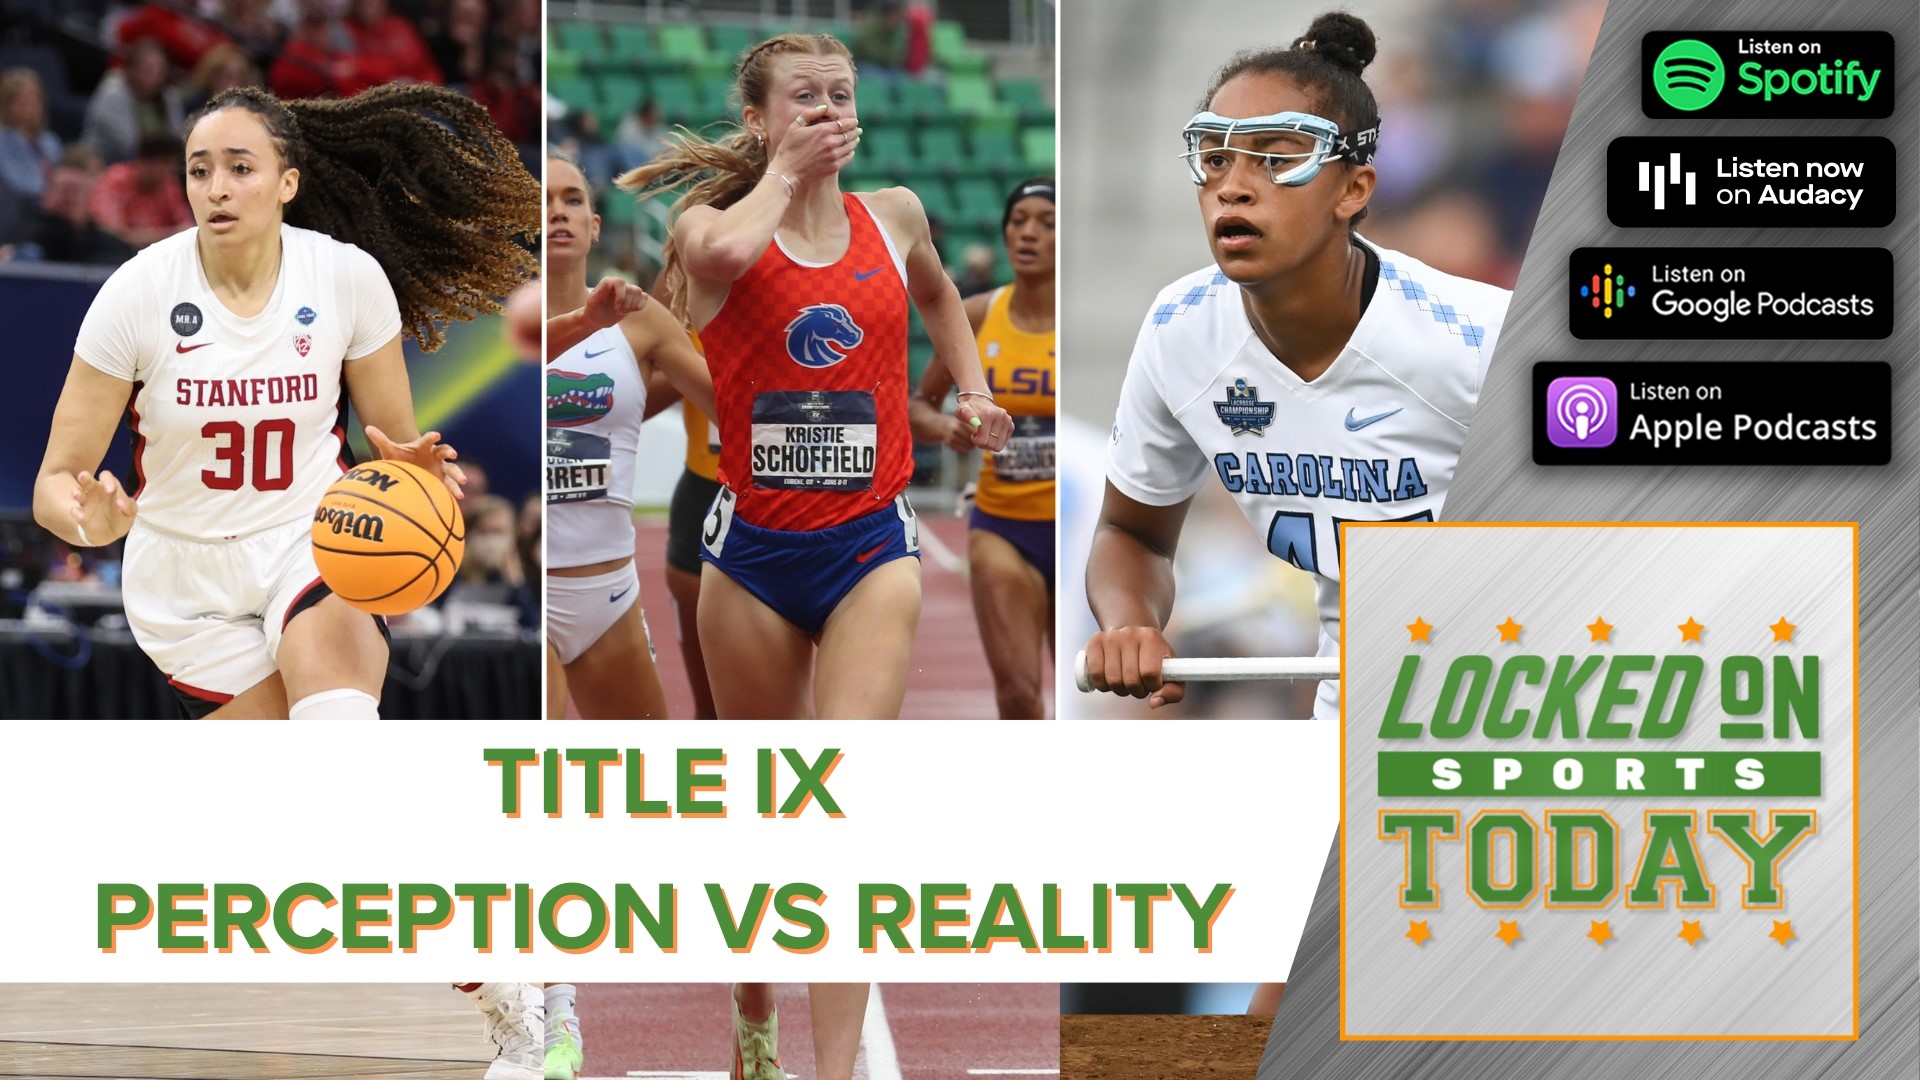 Discussing the reality of Title IX in sports, and what can be done to change its perception.